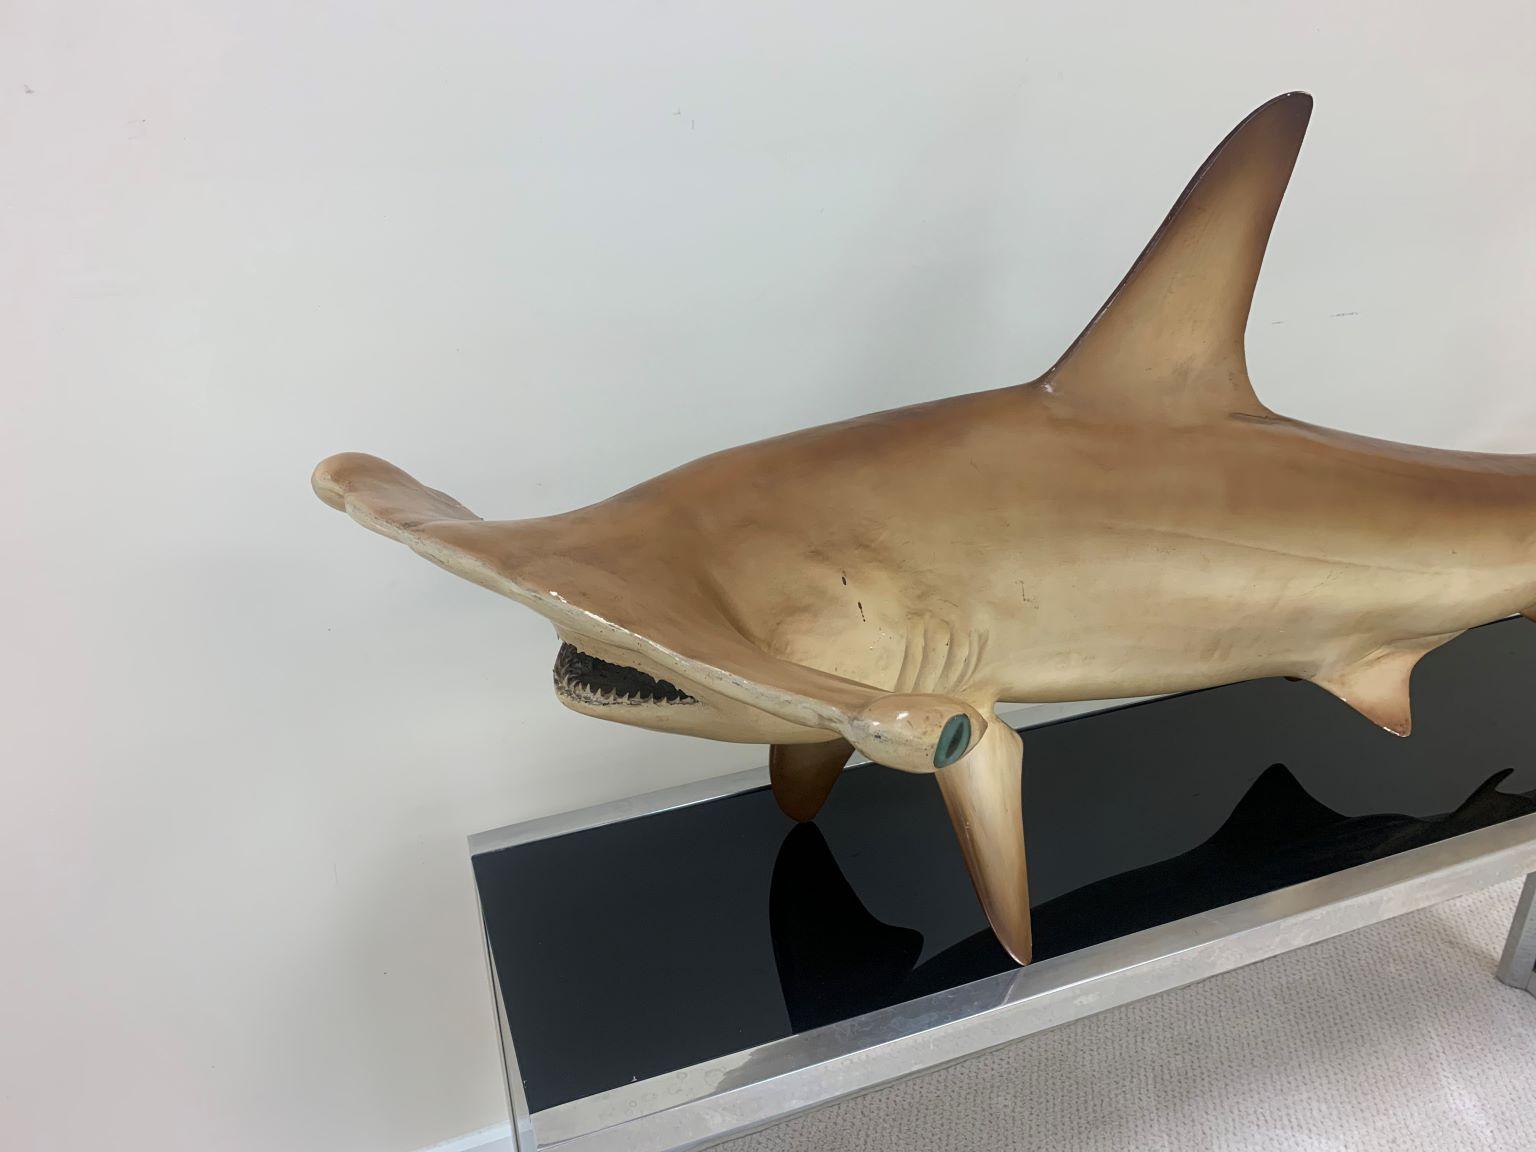 Spectacular vintage Hammerhead Shark sculptural mount. This shark mount would be a great conversational piece for any room. It has a bracket to be mounted on a wall but would also look fabulous on a console table or any other case piece. Circa